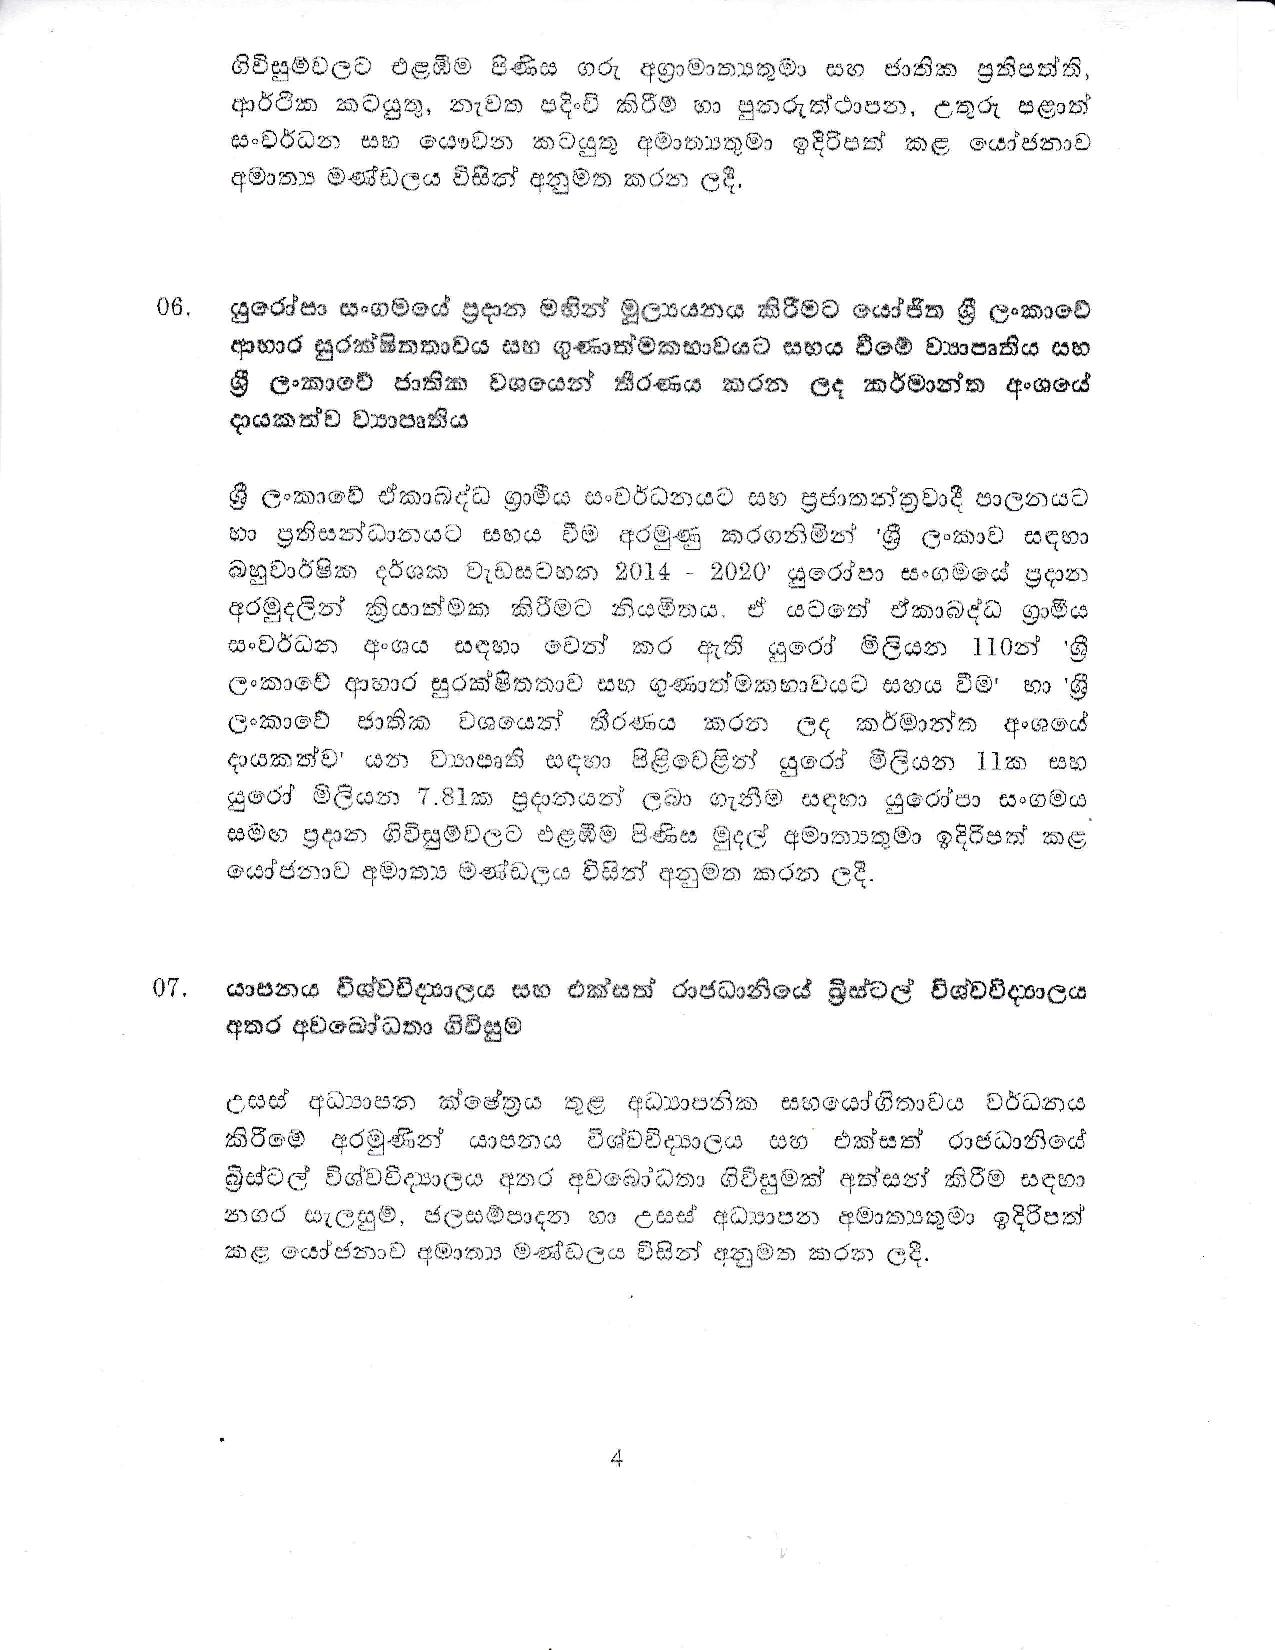 Cabinet Decision on 17.09.2019 Full document page 004